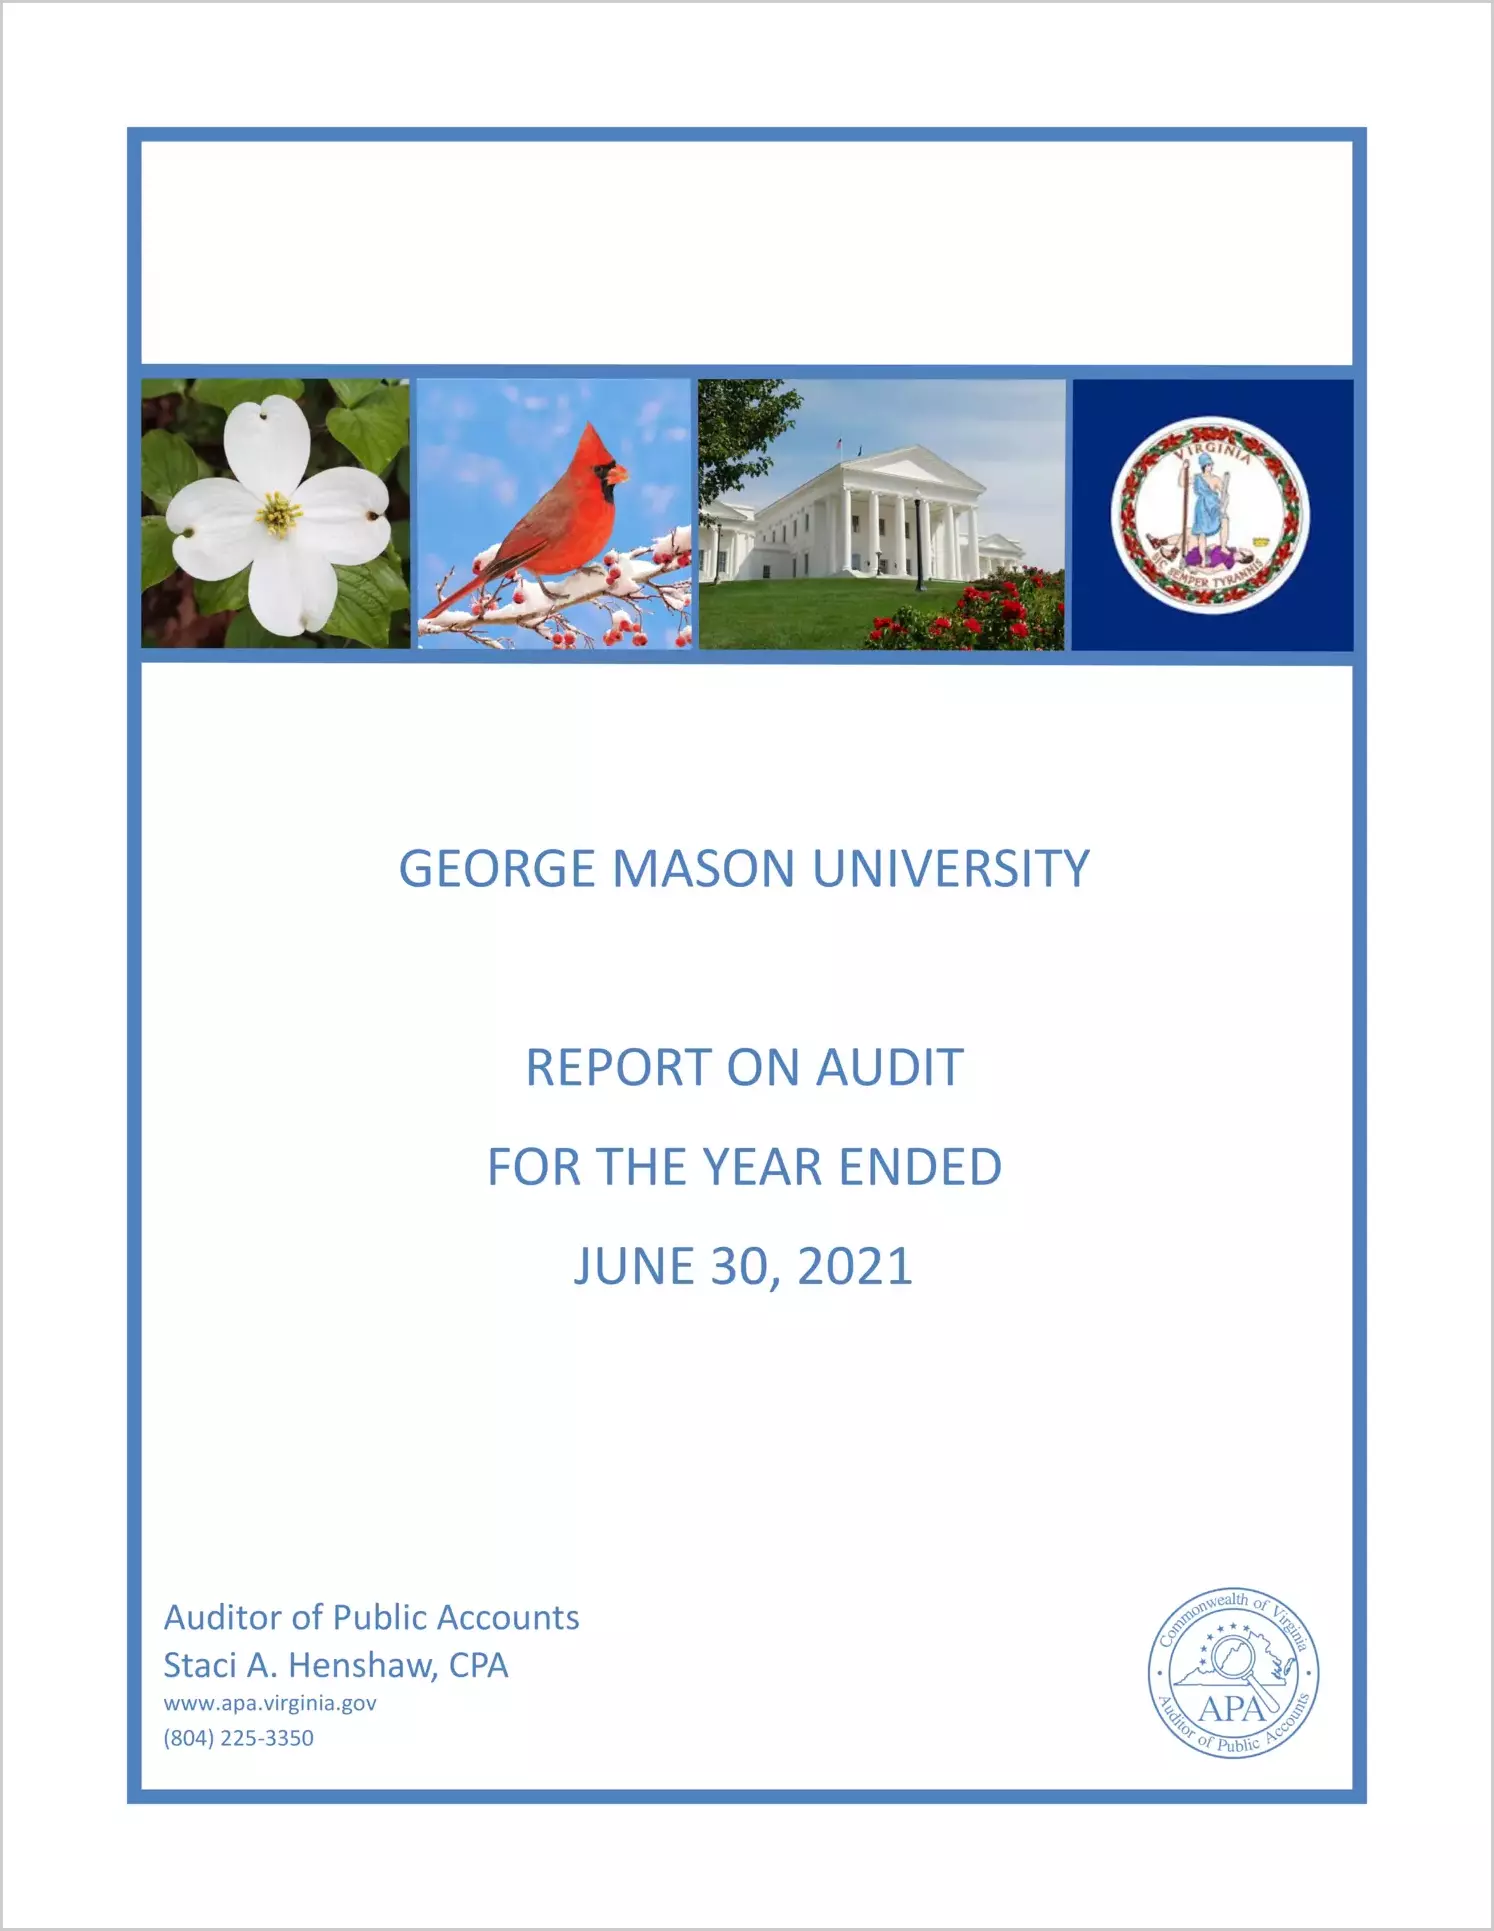 George Mason University for the year ended June 30, 2021